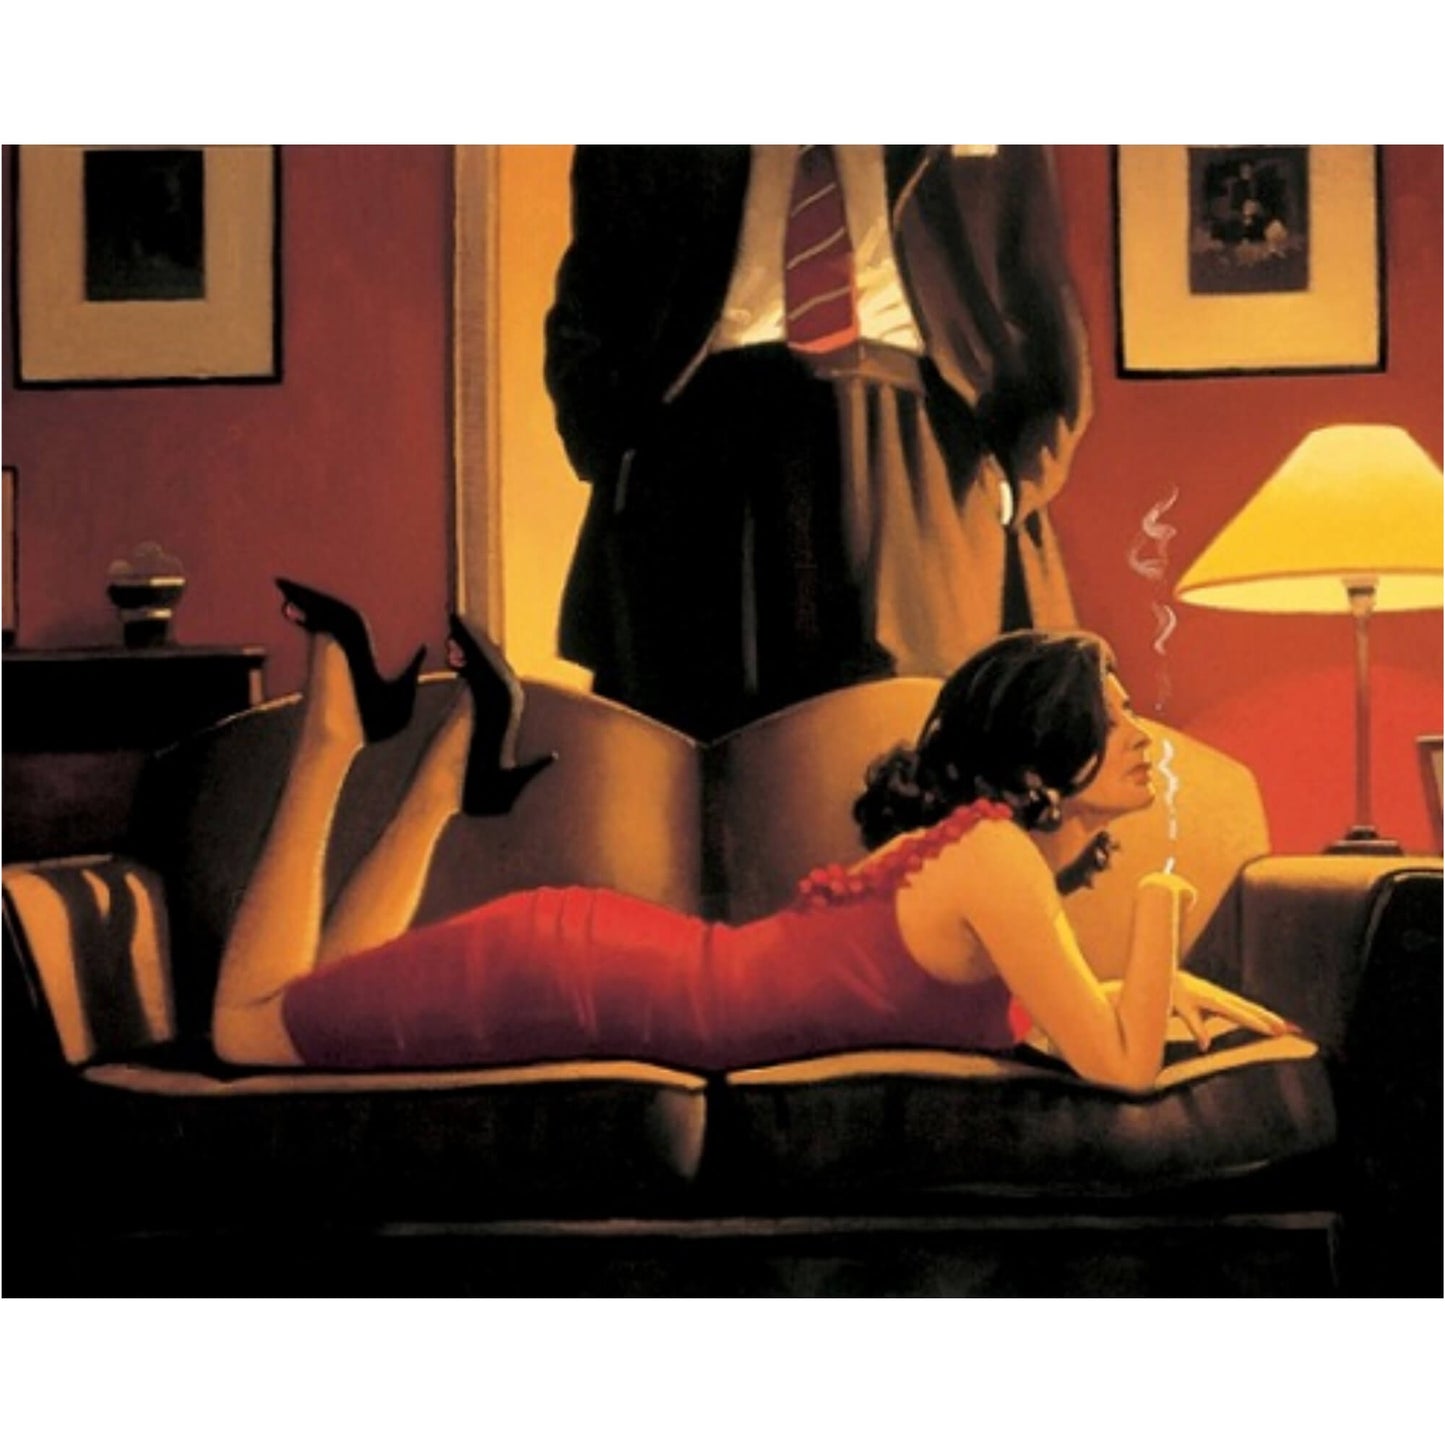 The Parlour of Temptation Limited Edition Print Jack Vettriano